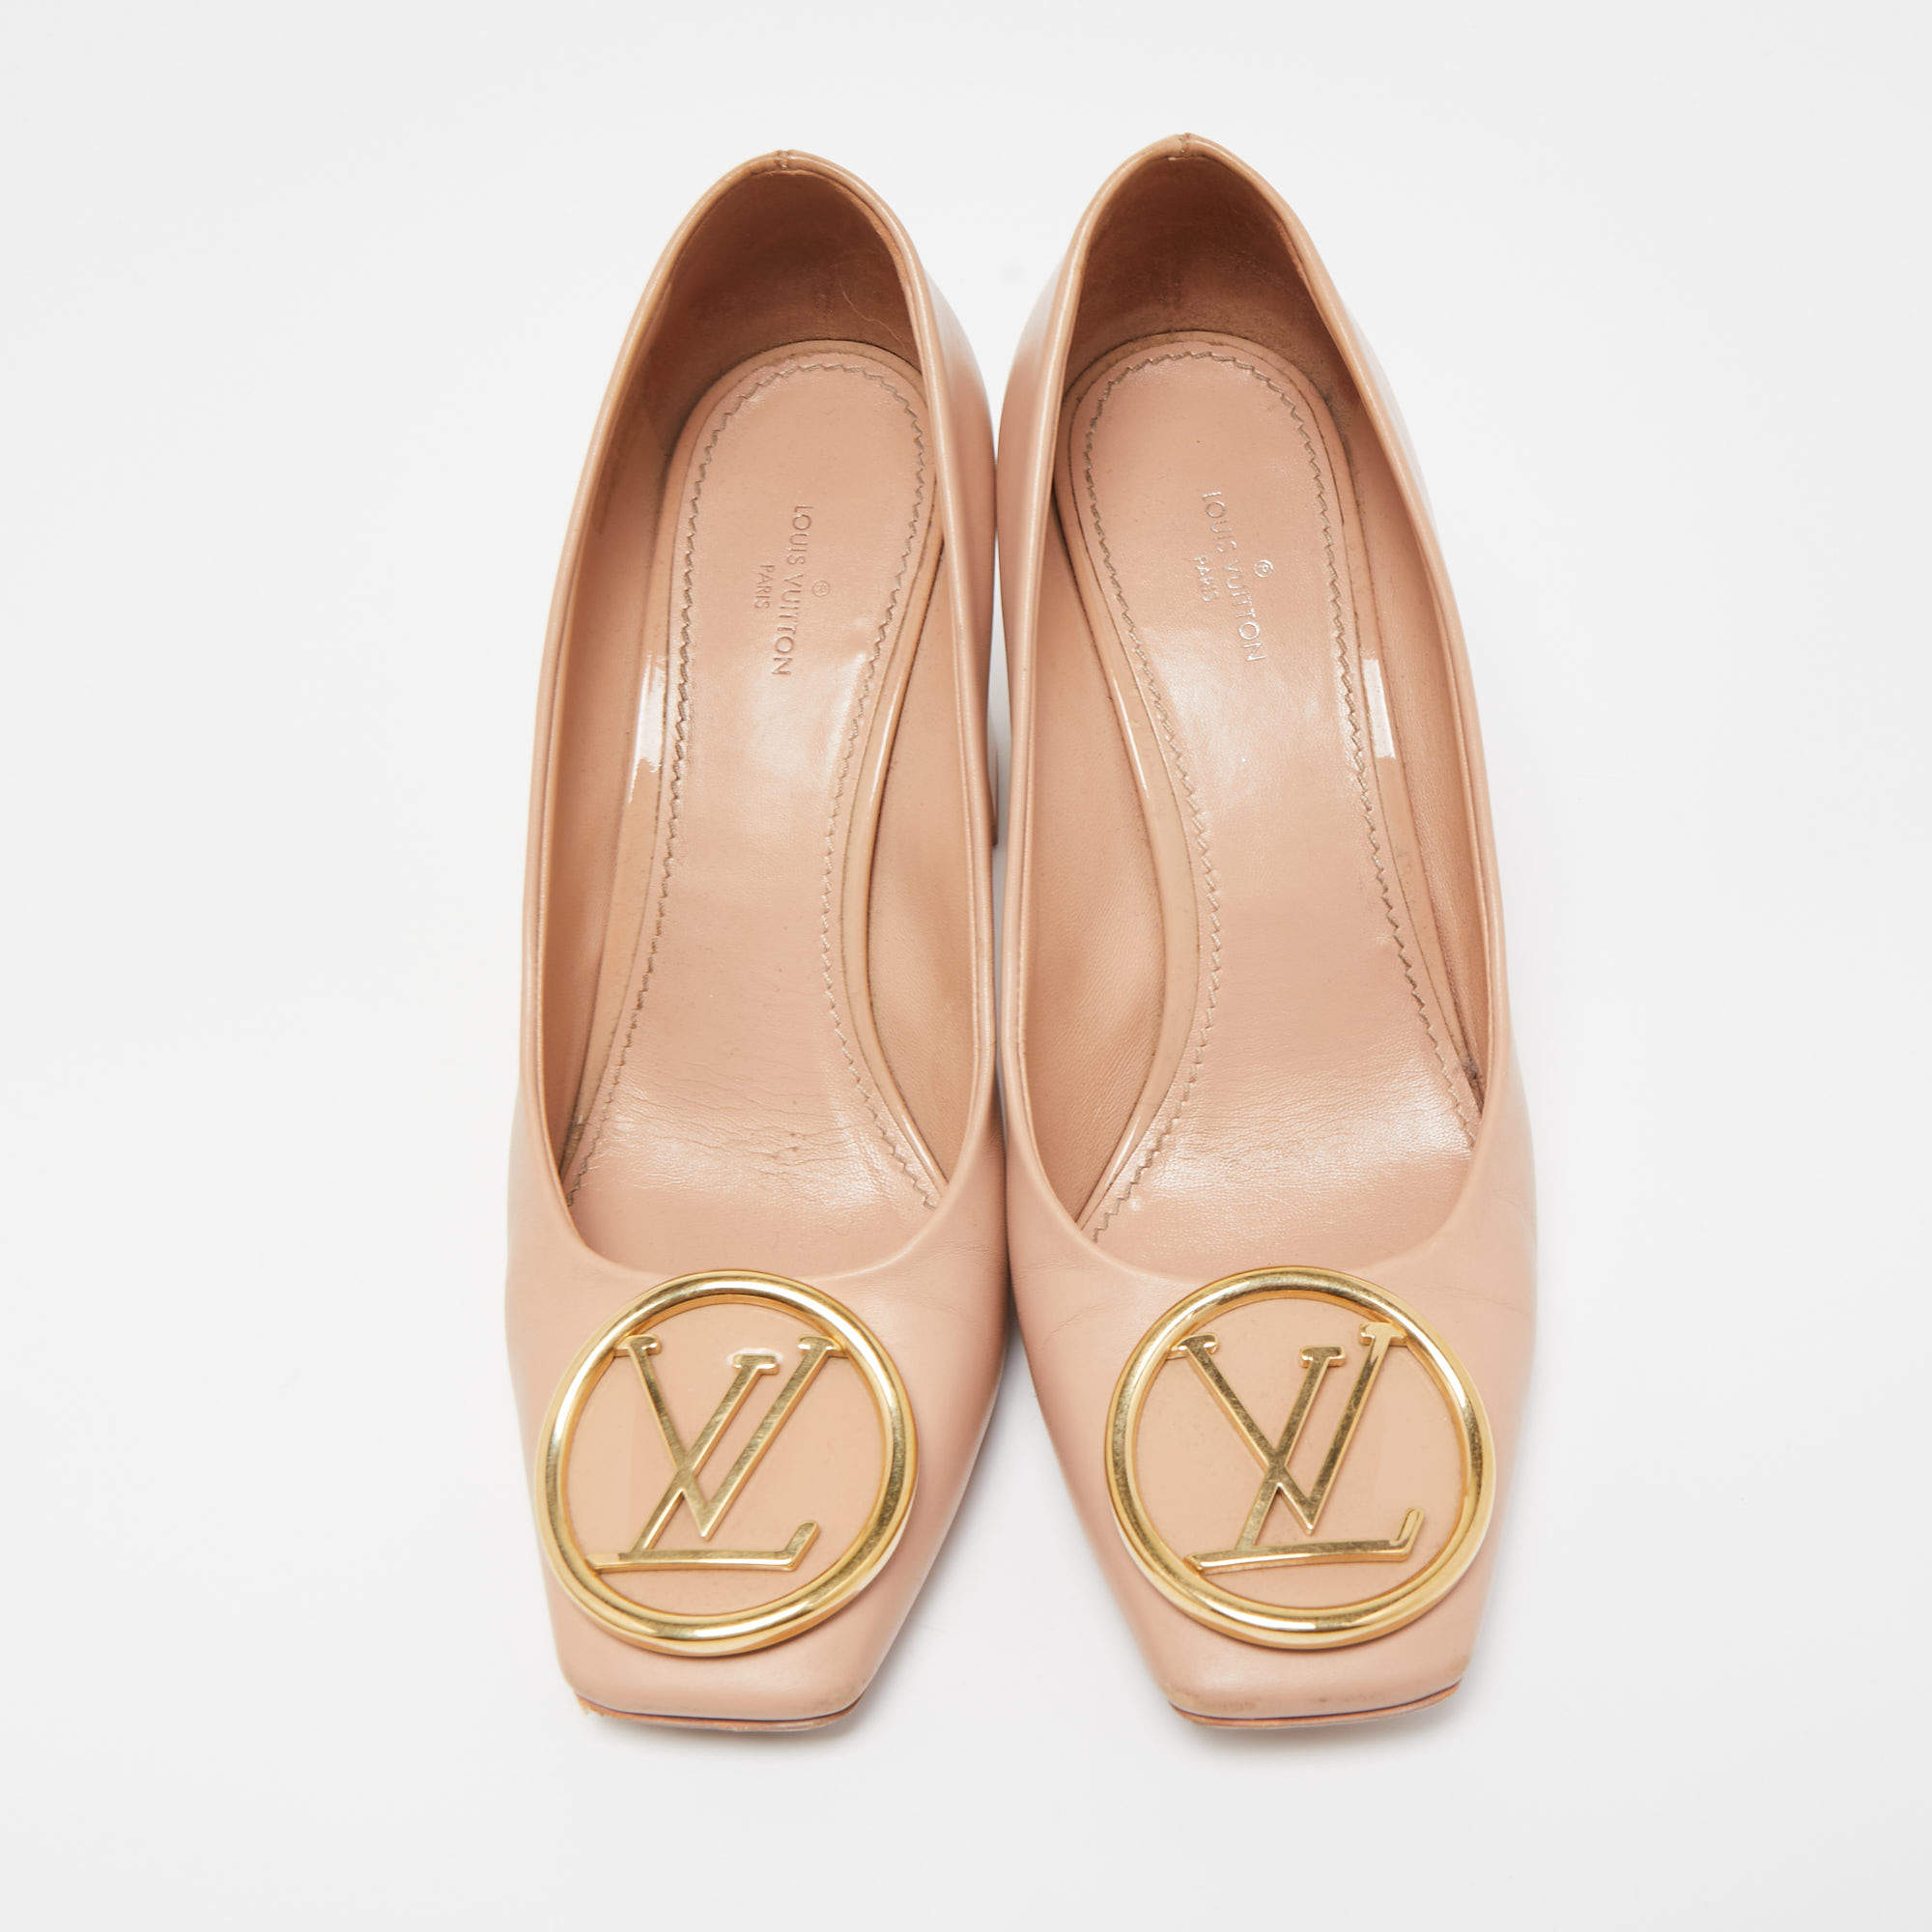 Pre-owned Louis Vuitton Beige Leather Madeleine Pumps Size 38.5